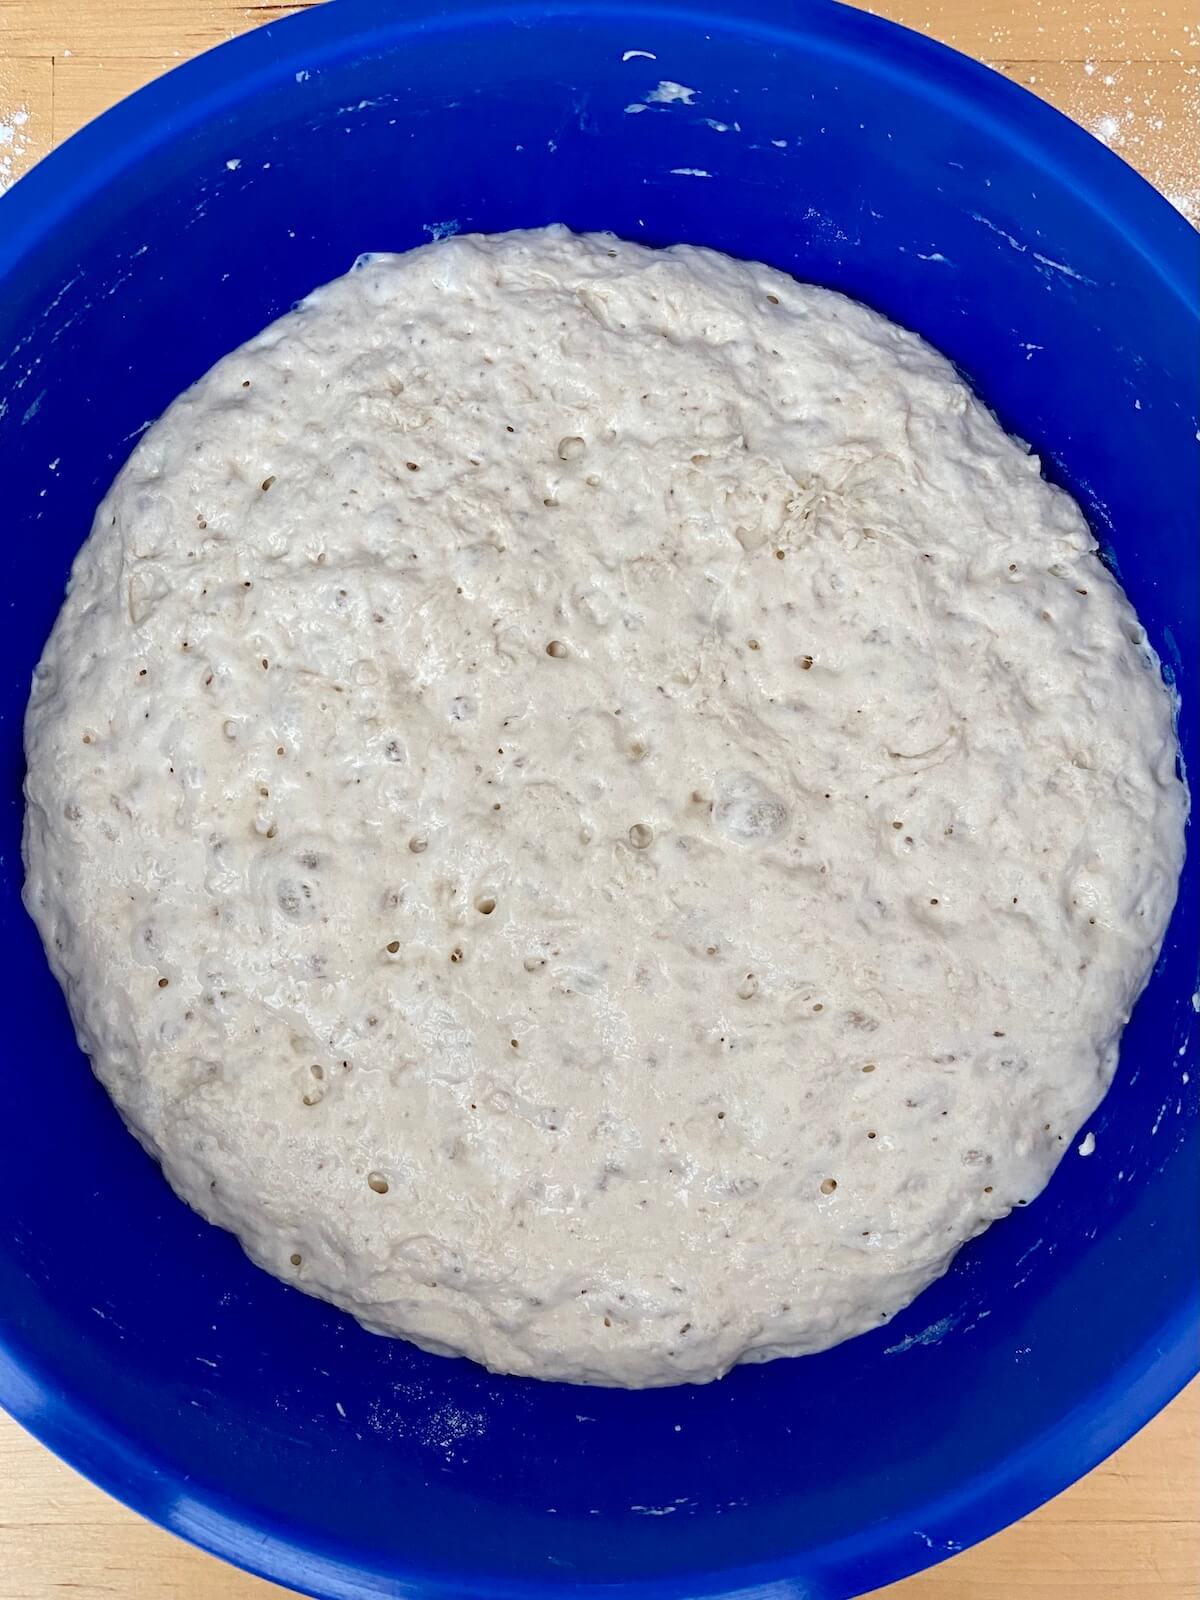 A blue bowl with 72-hour pizza dough after bulk fermenting for 24 hours. The dough is very bubbly.